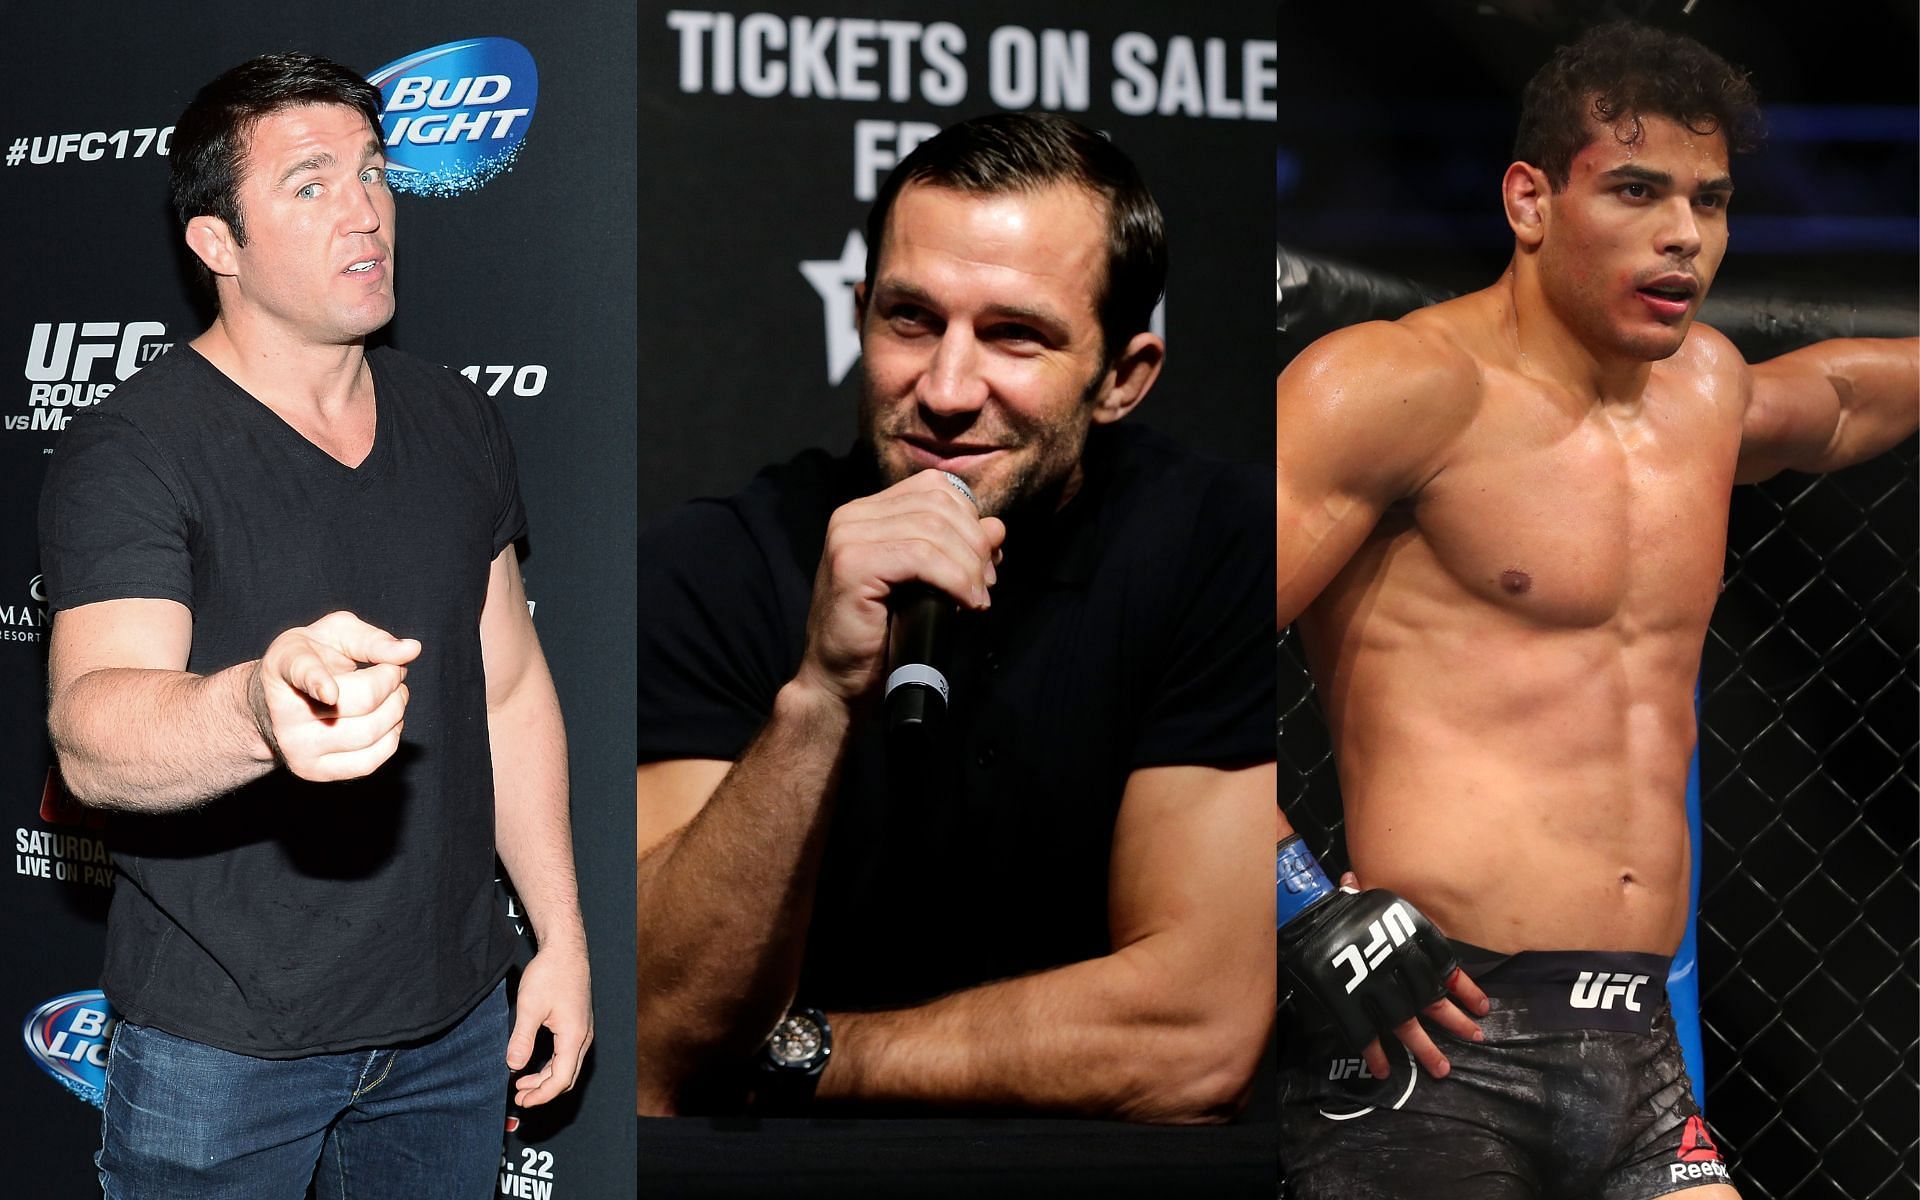 From left to right: Chael Sonnen, Luke Rockhold, Paulo Costa